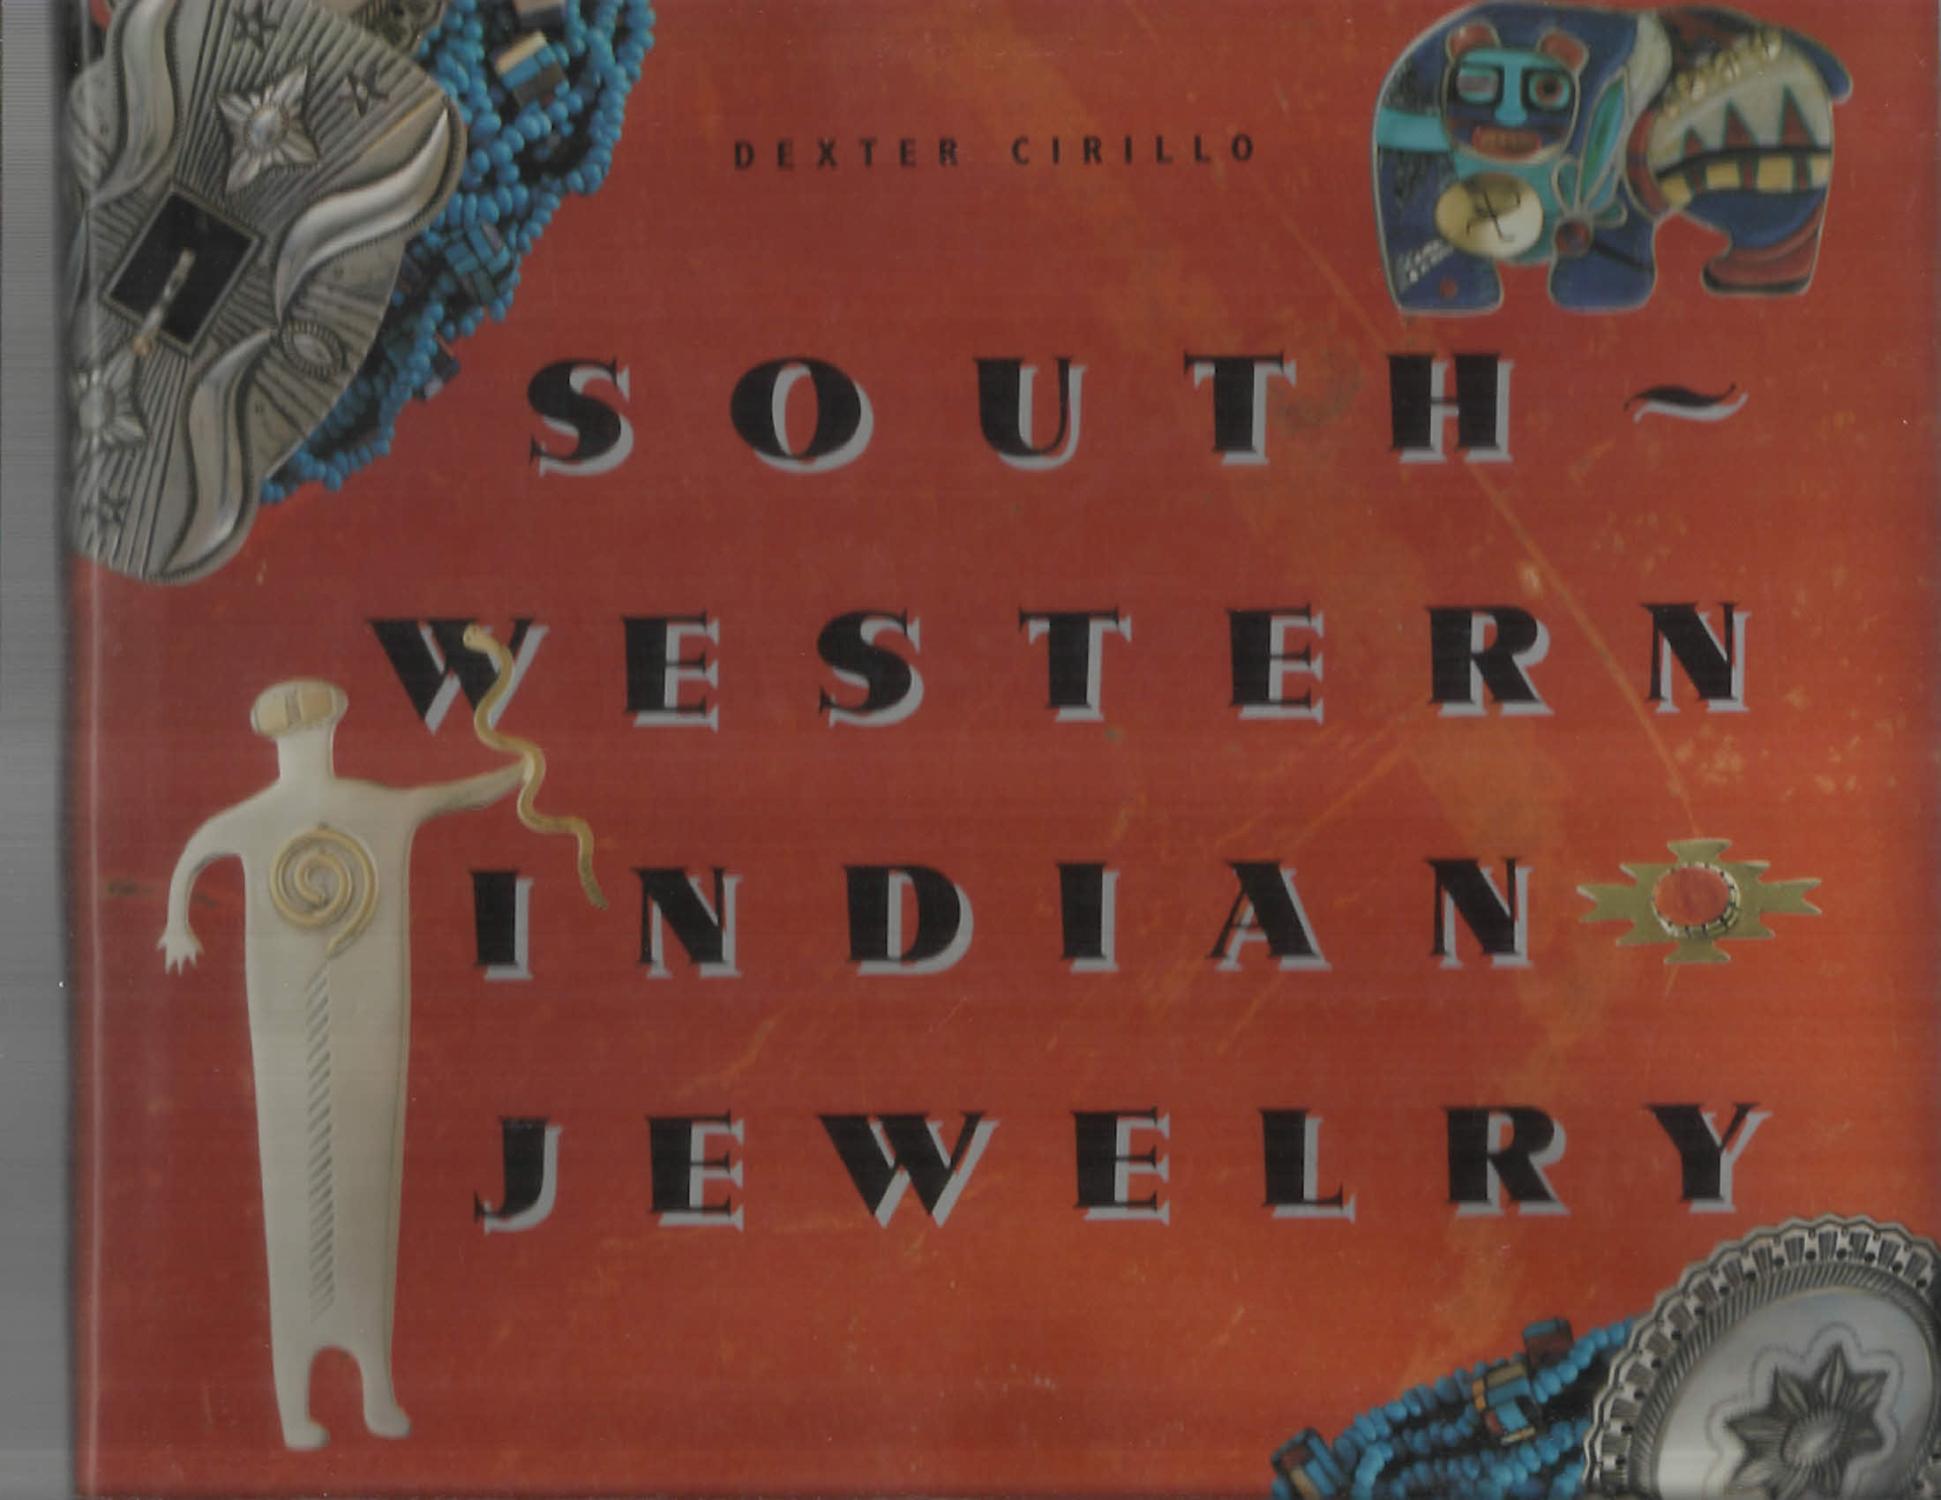 SOUTH~WESTERN INDIAN JEWELRY. Photographs Of Jewelry By Michel Monteaux. Photographs Of Artists By Stephen Northup. - Cirillo, Dexter